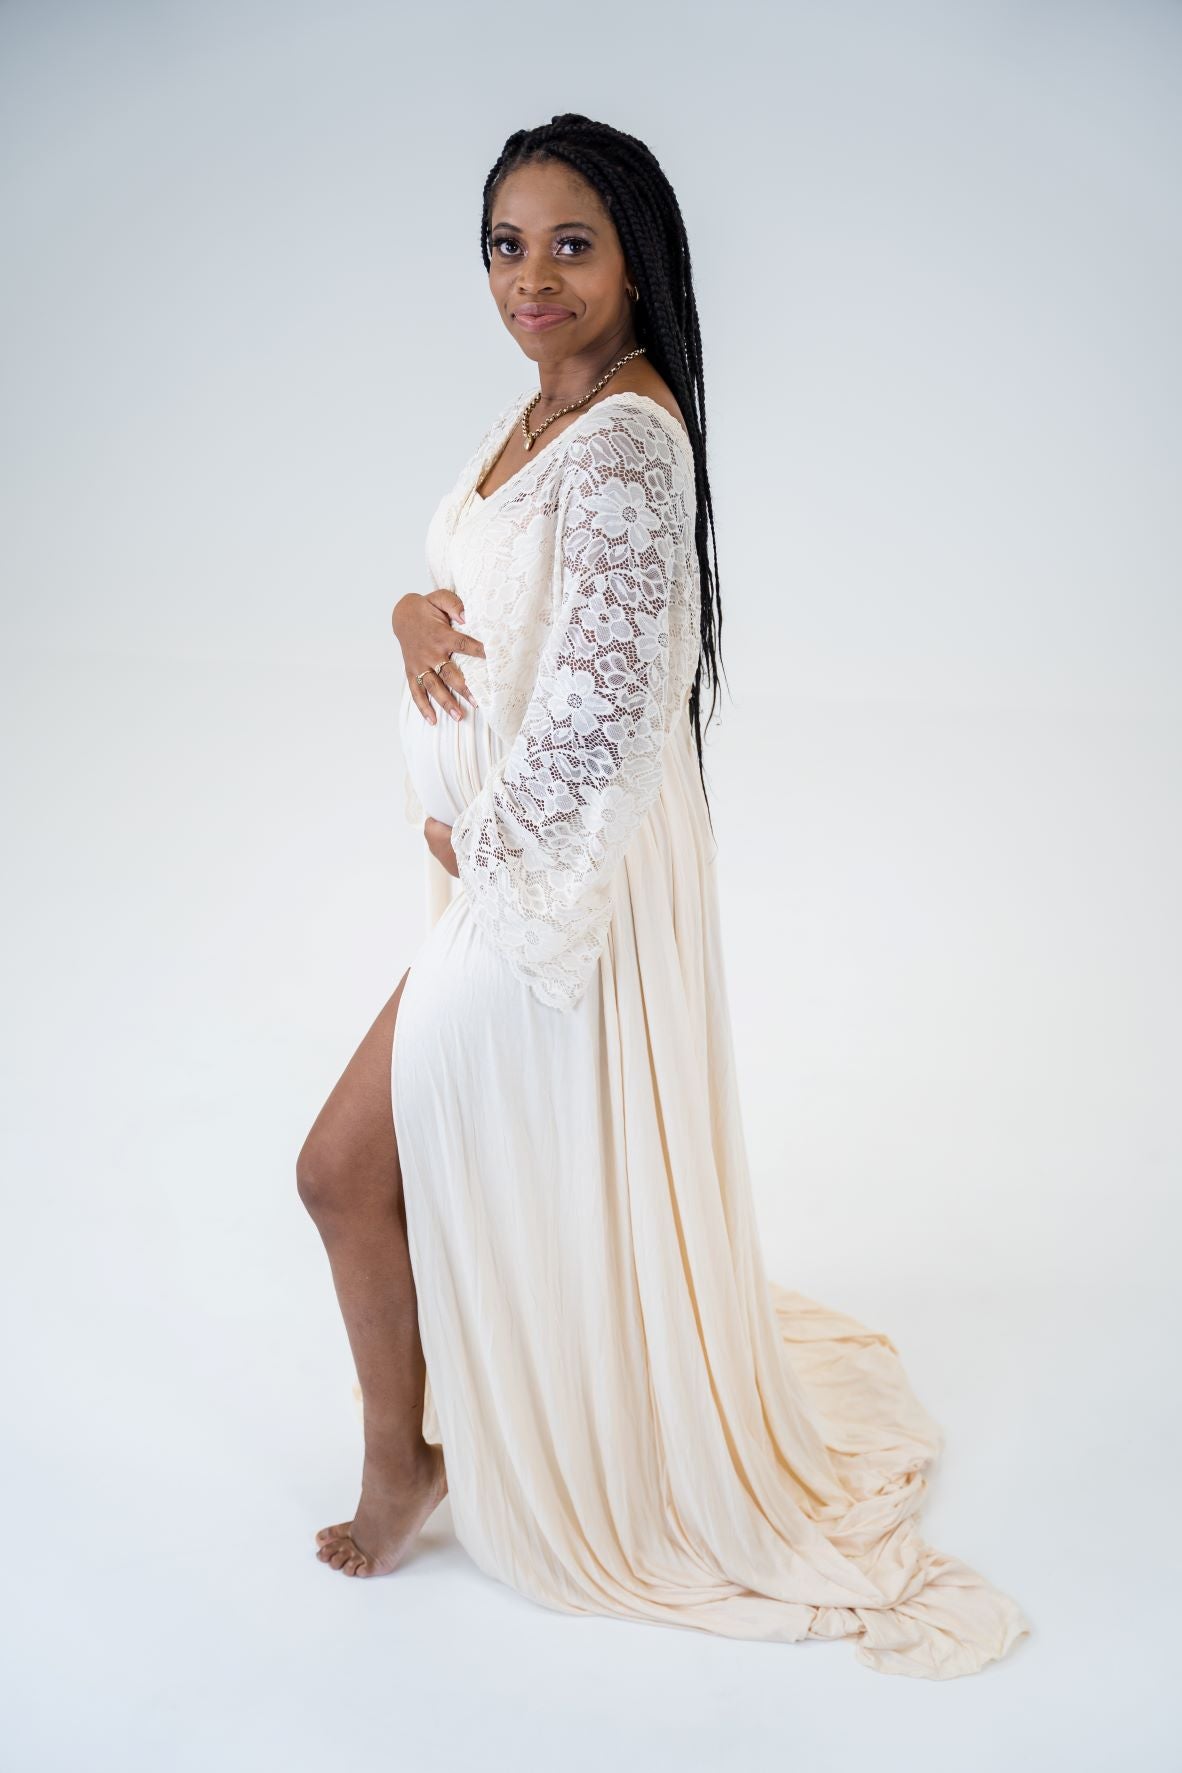 Prewedding Gowns | Prewedding And Maternity Photoshoot Gowns On Rent